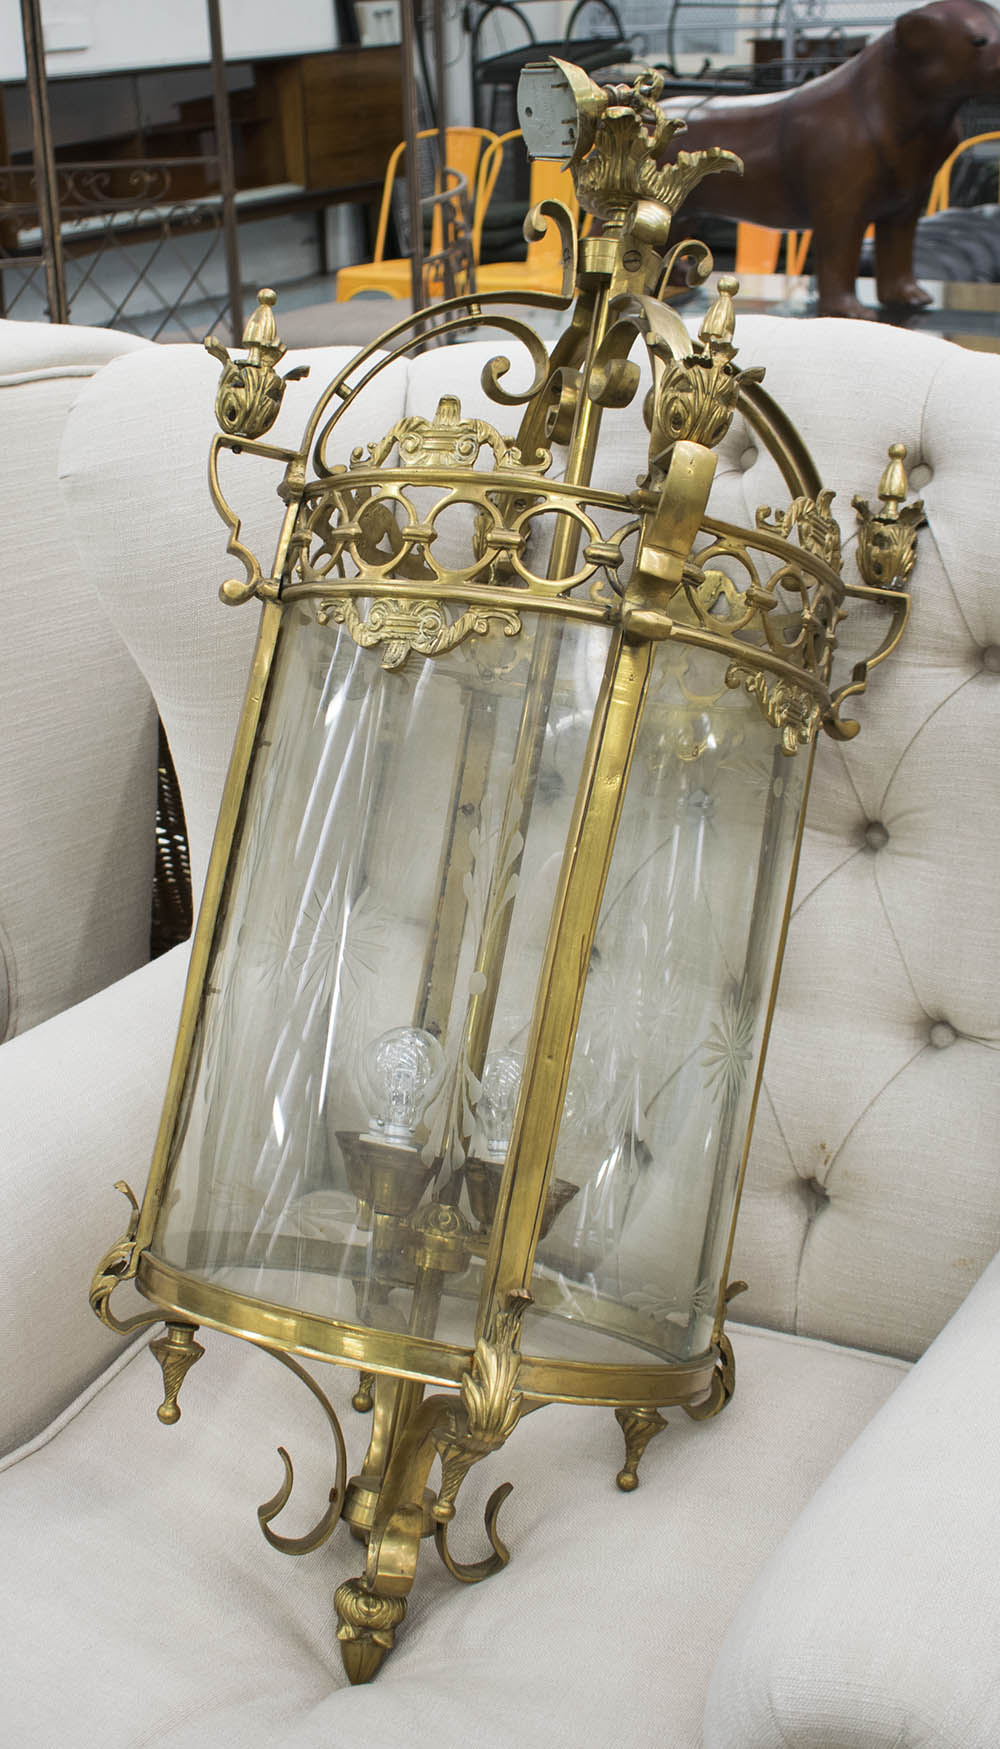 HALL LANTERN, of substantial proportions, with curved etched glass panels, 93cm H x 45cm.